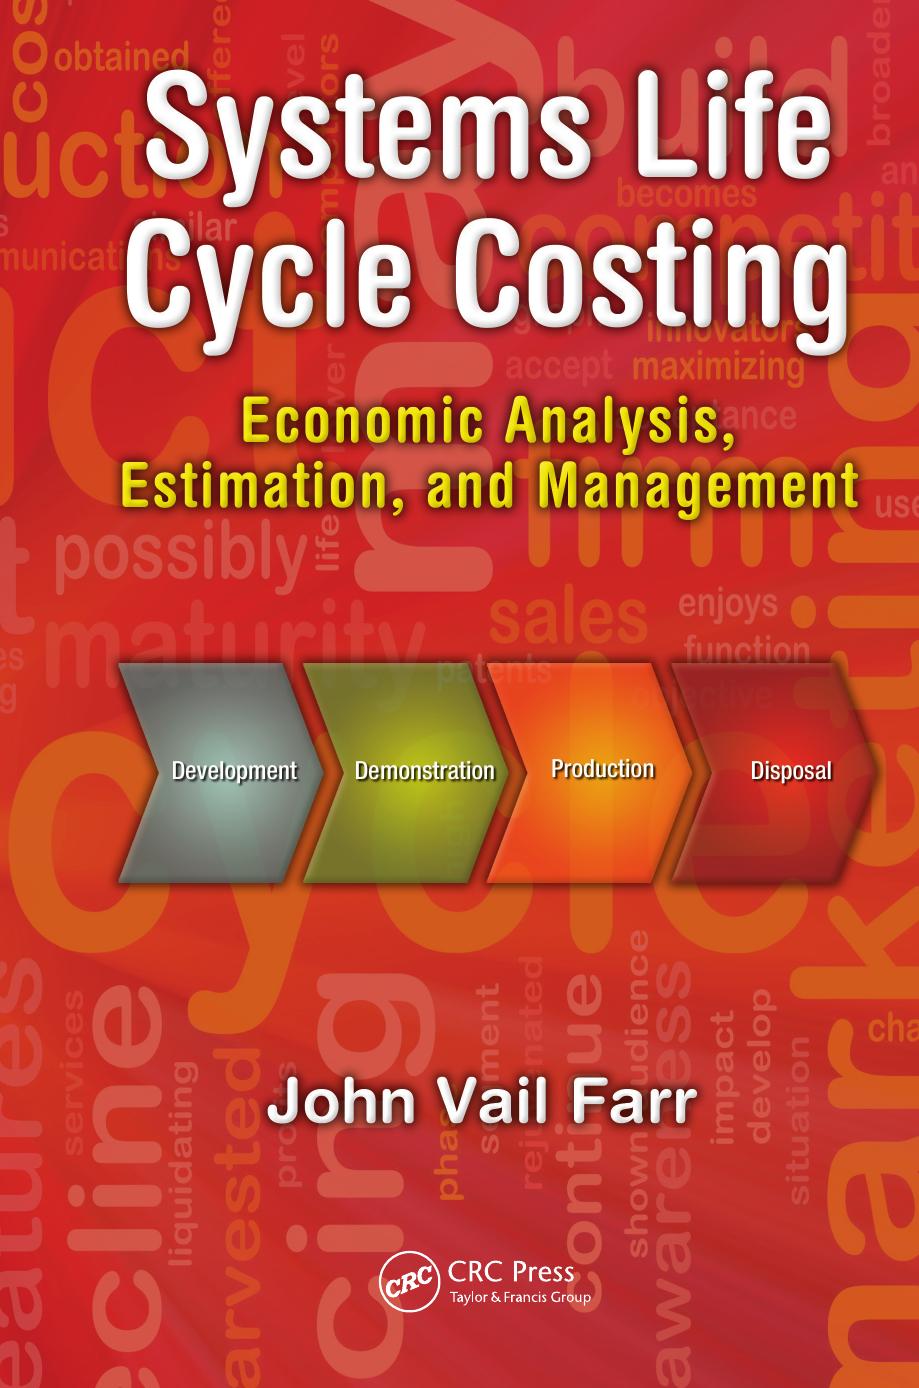 Systems Life Cycle Costing